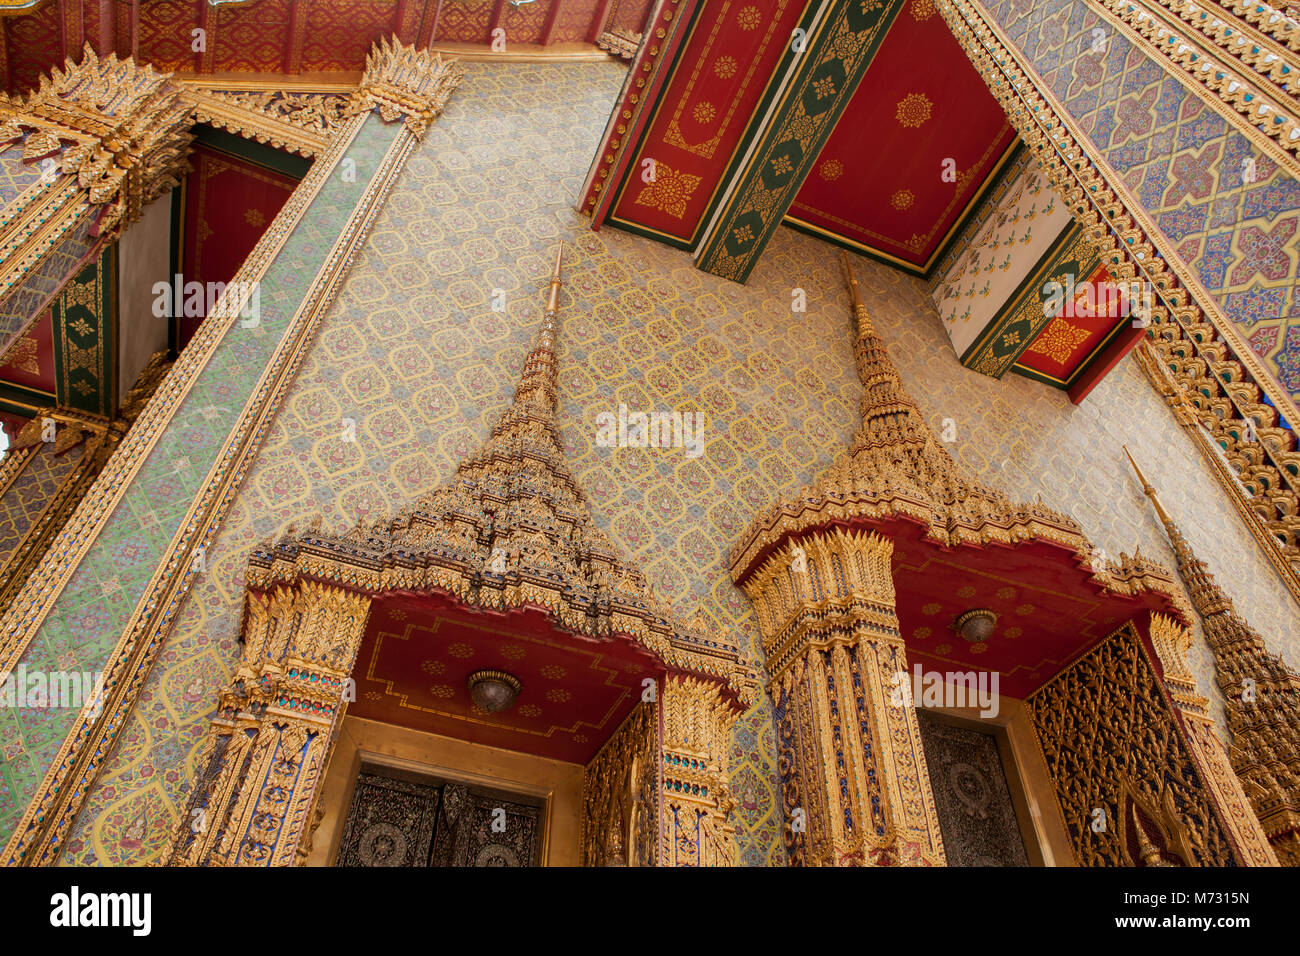 Architectural details of the main temple inside the Grand Palace in Bangkok view from below Stock Photo